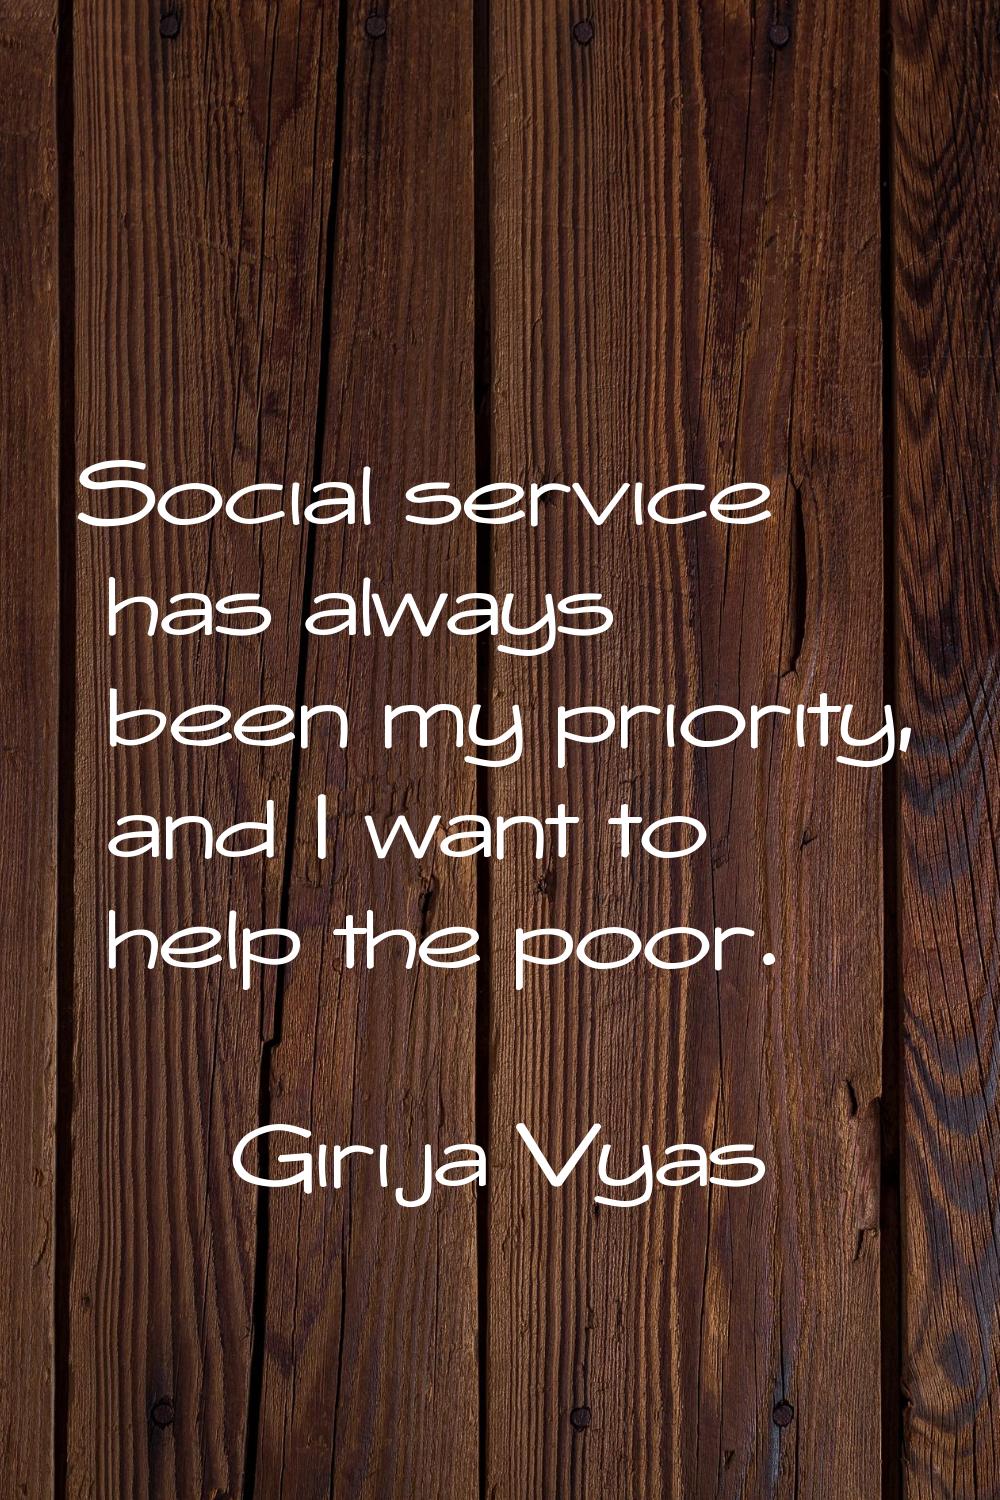 Social service has always been my priority, and I want to help the poor.